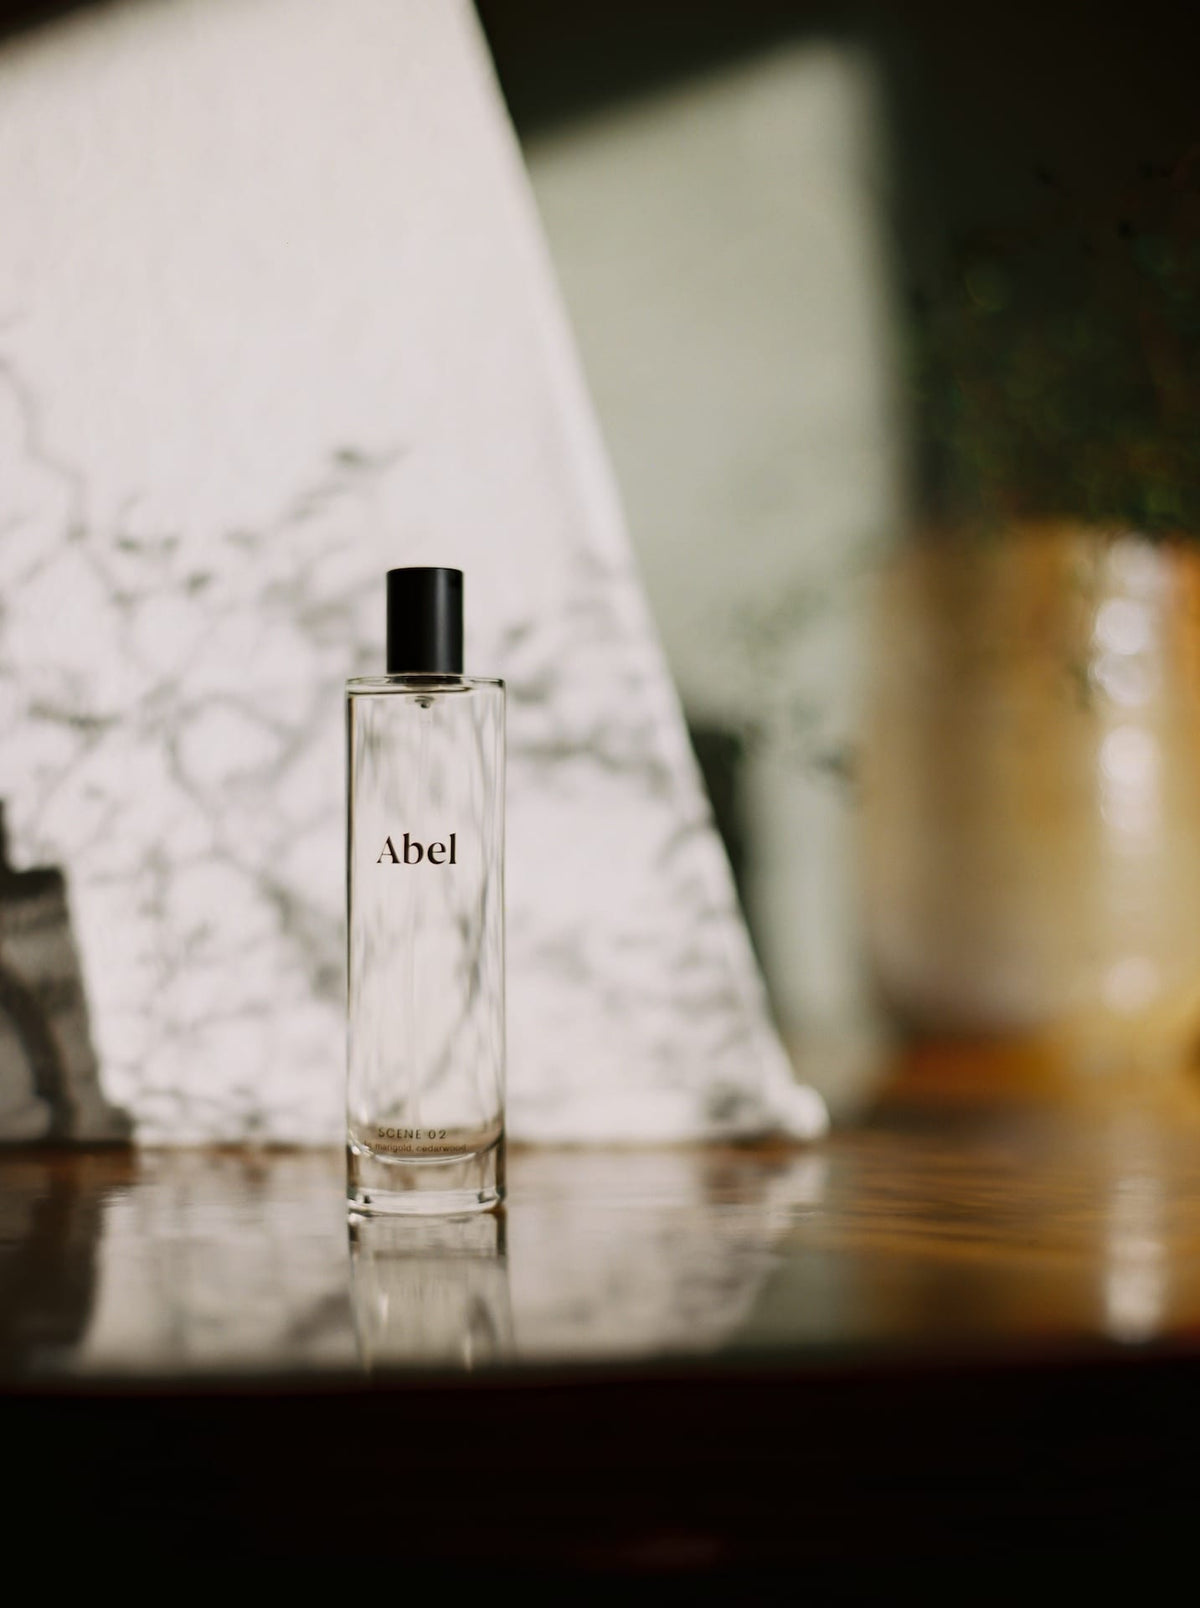 A bottle of Abel Room Spray - Scene 02 ⋅ fig, marigold, cedarwood on a reflective surface with a blurred background.